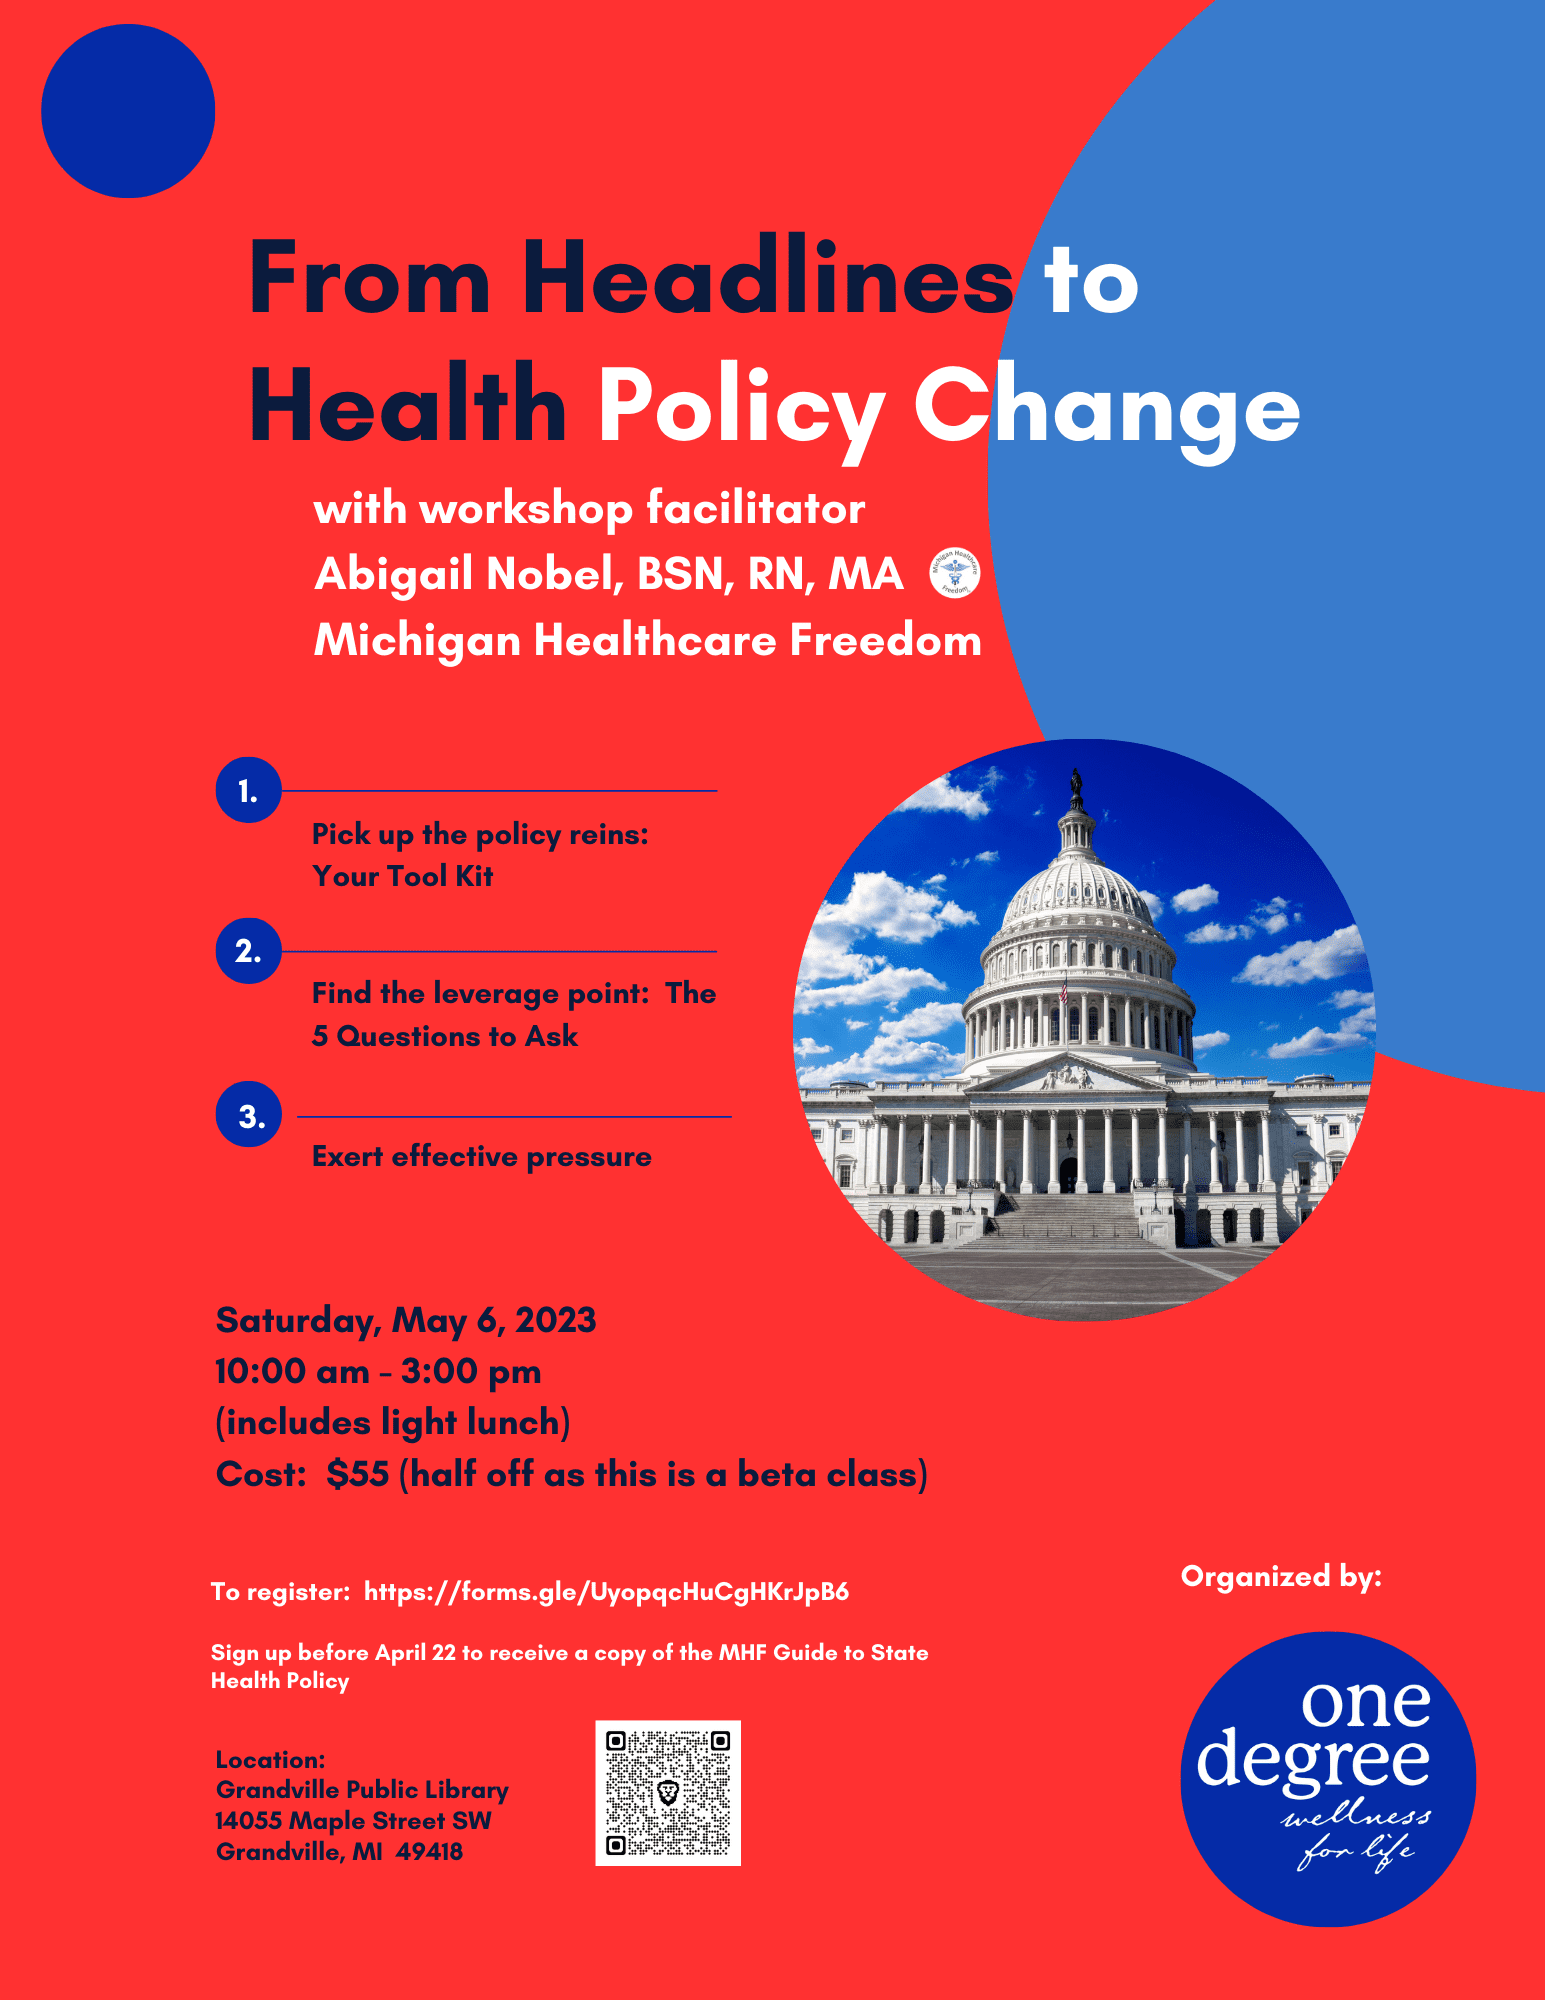 From Headlines to Health Policy Change